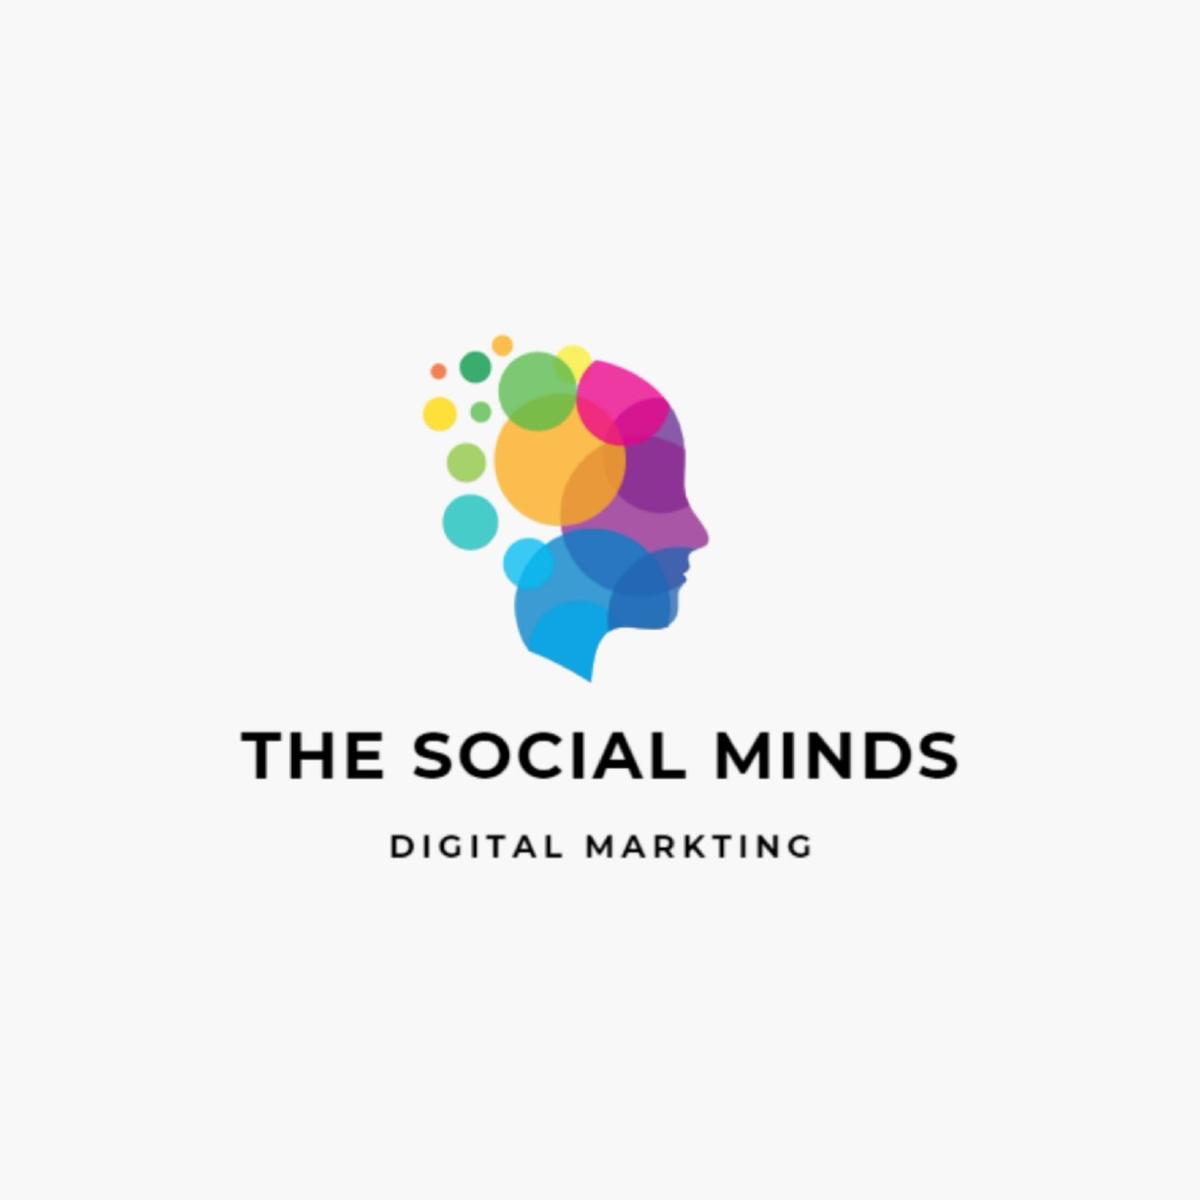 TheSocialMinds's images